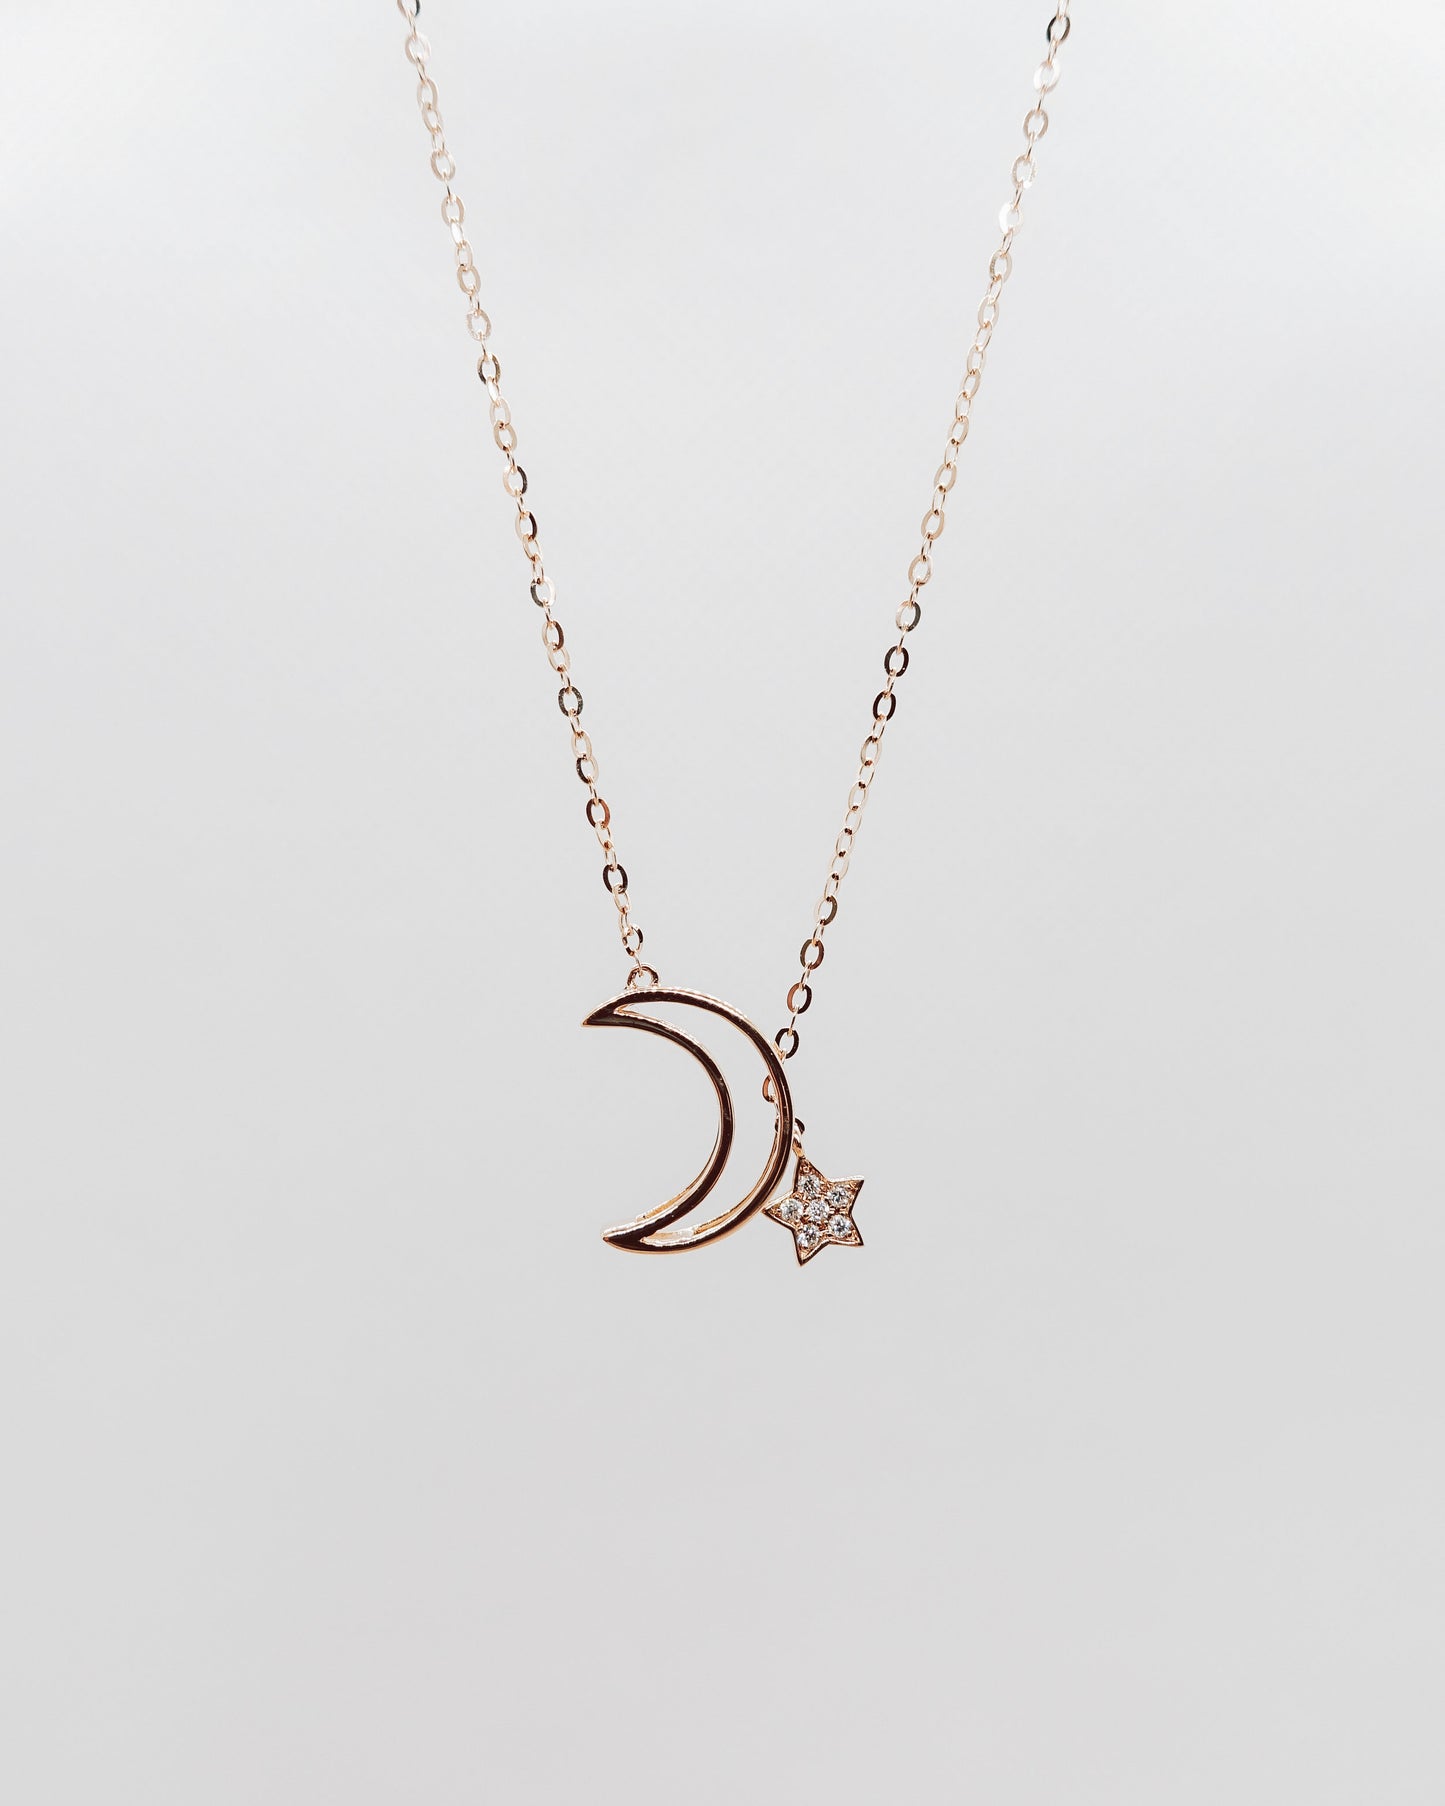 "shine together" moon and star lariat necklace